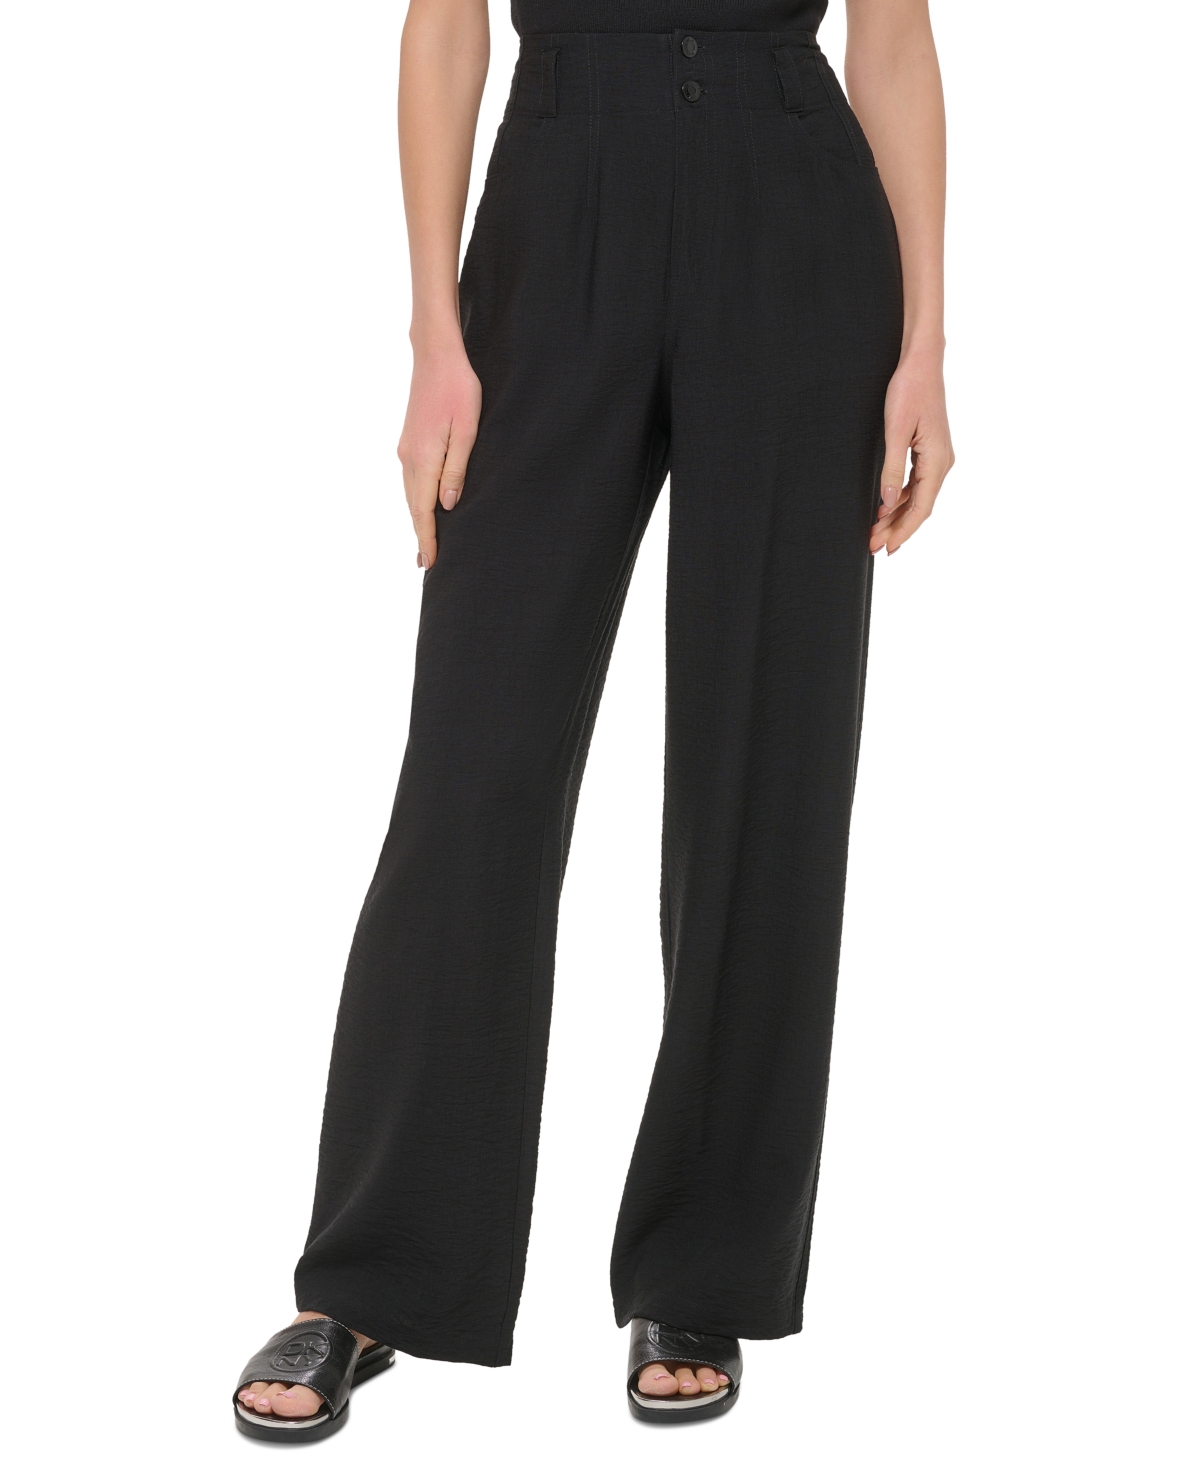 Women's Top-Stitched Crinkle Trousers - Black